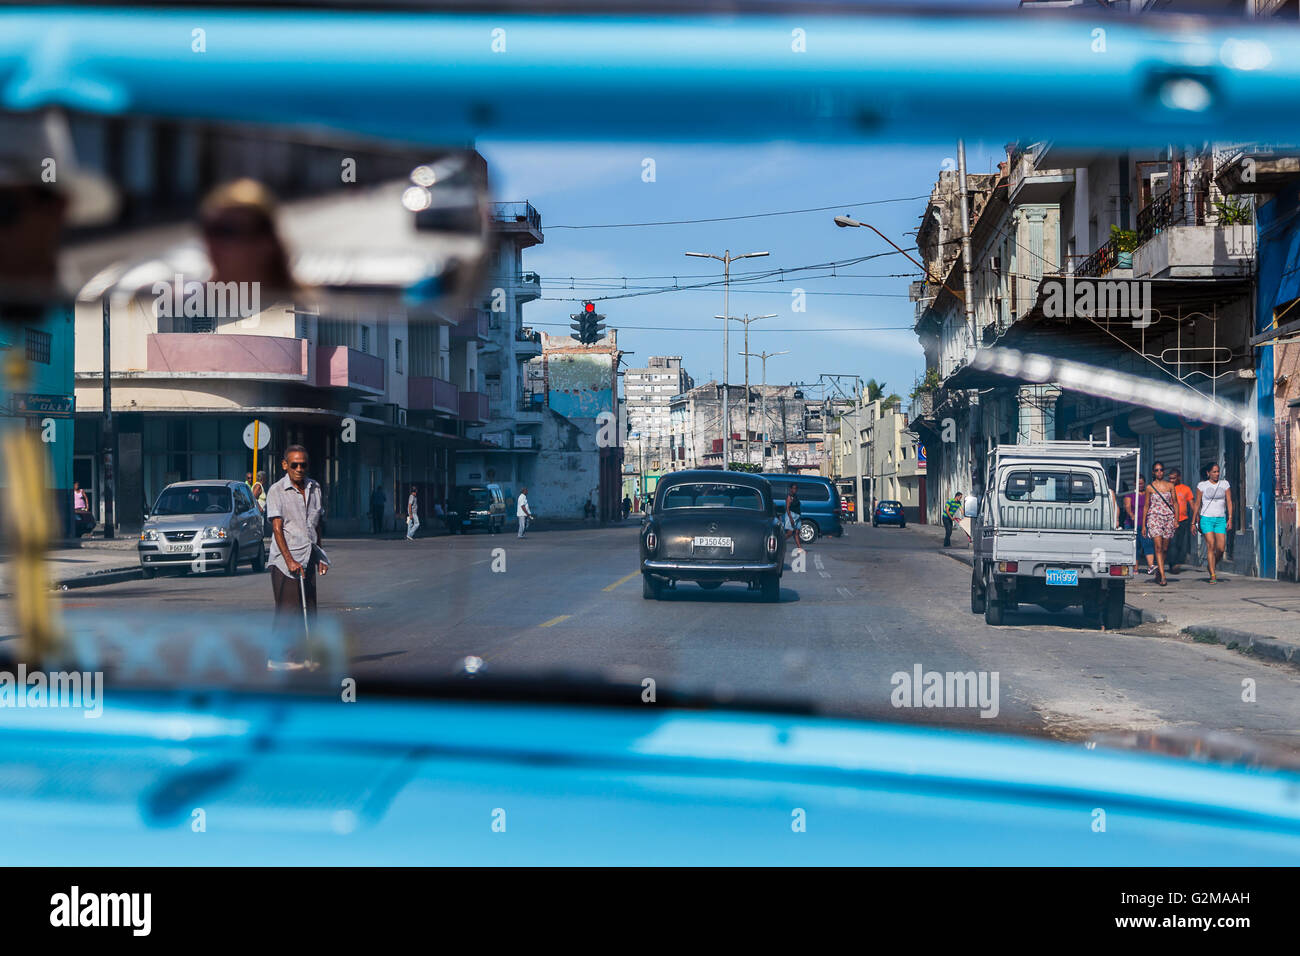 Looking through the windscreen of a blue & white classical Ford car as it travels through the streets of Havana. Stock Photo